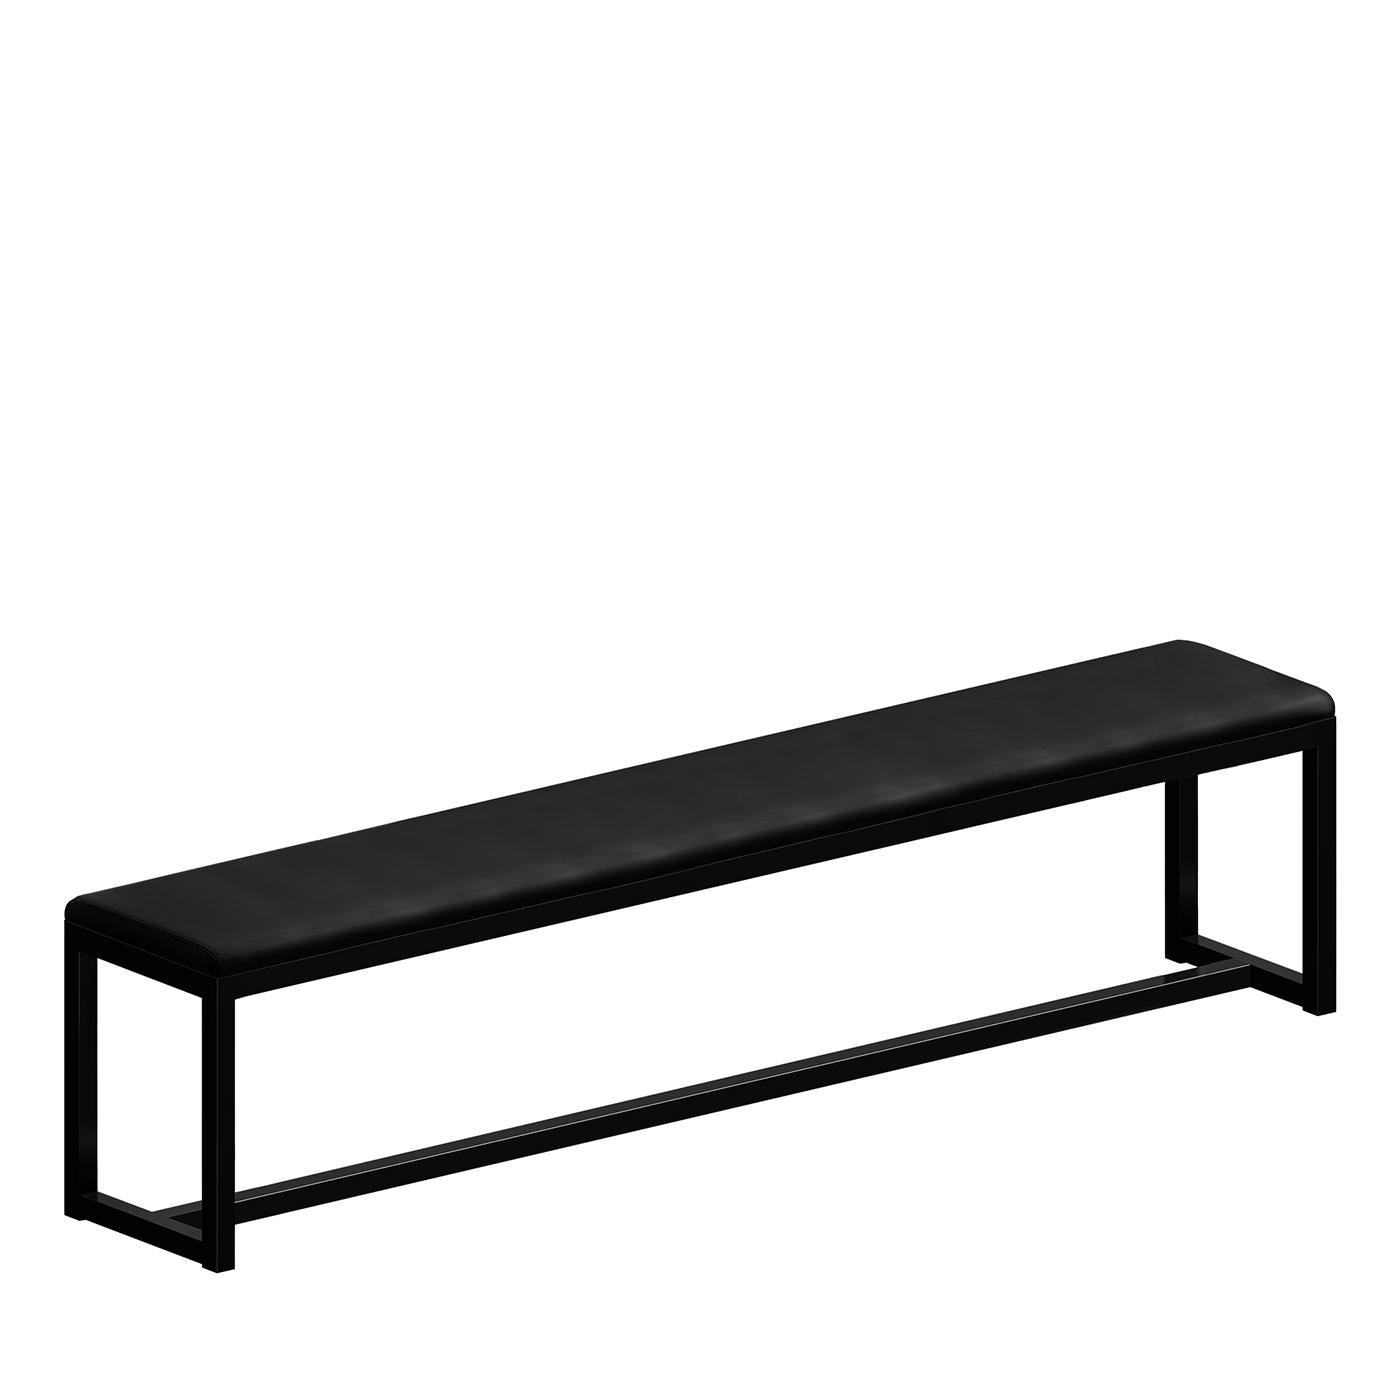 Big Brother Large Black Bench by Maurizio Peregalli For Sale 1